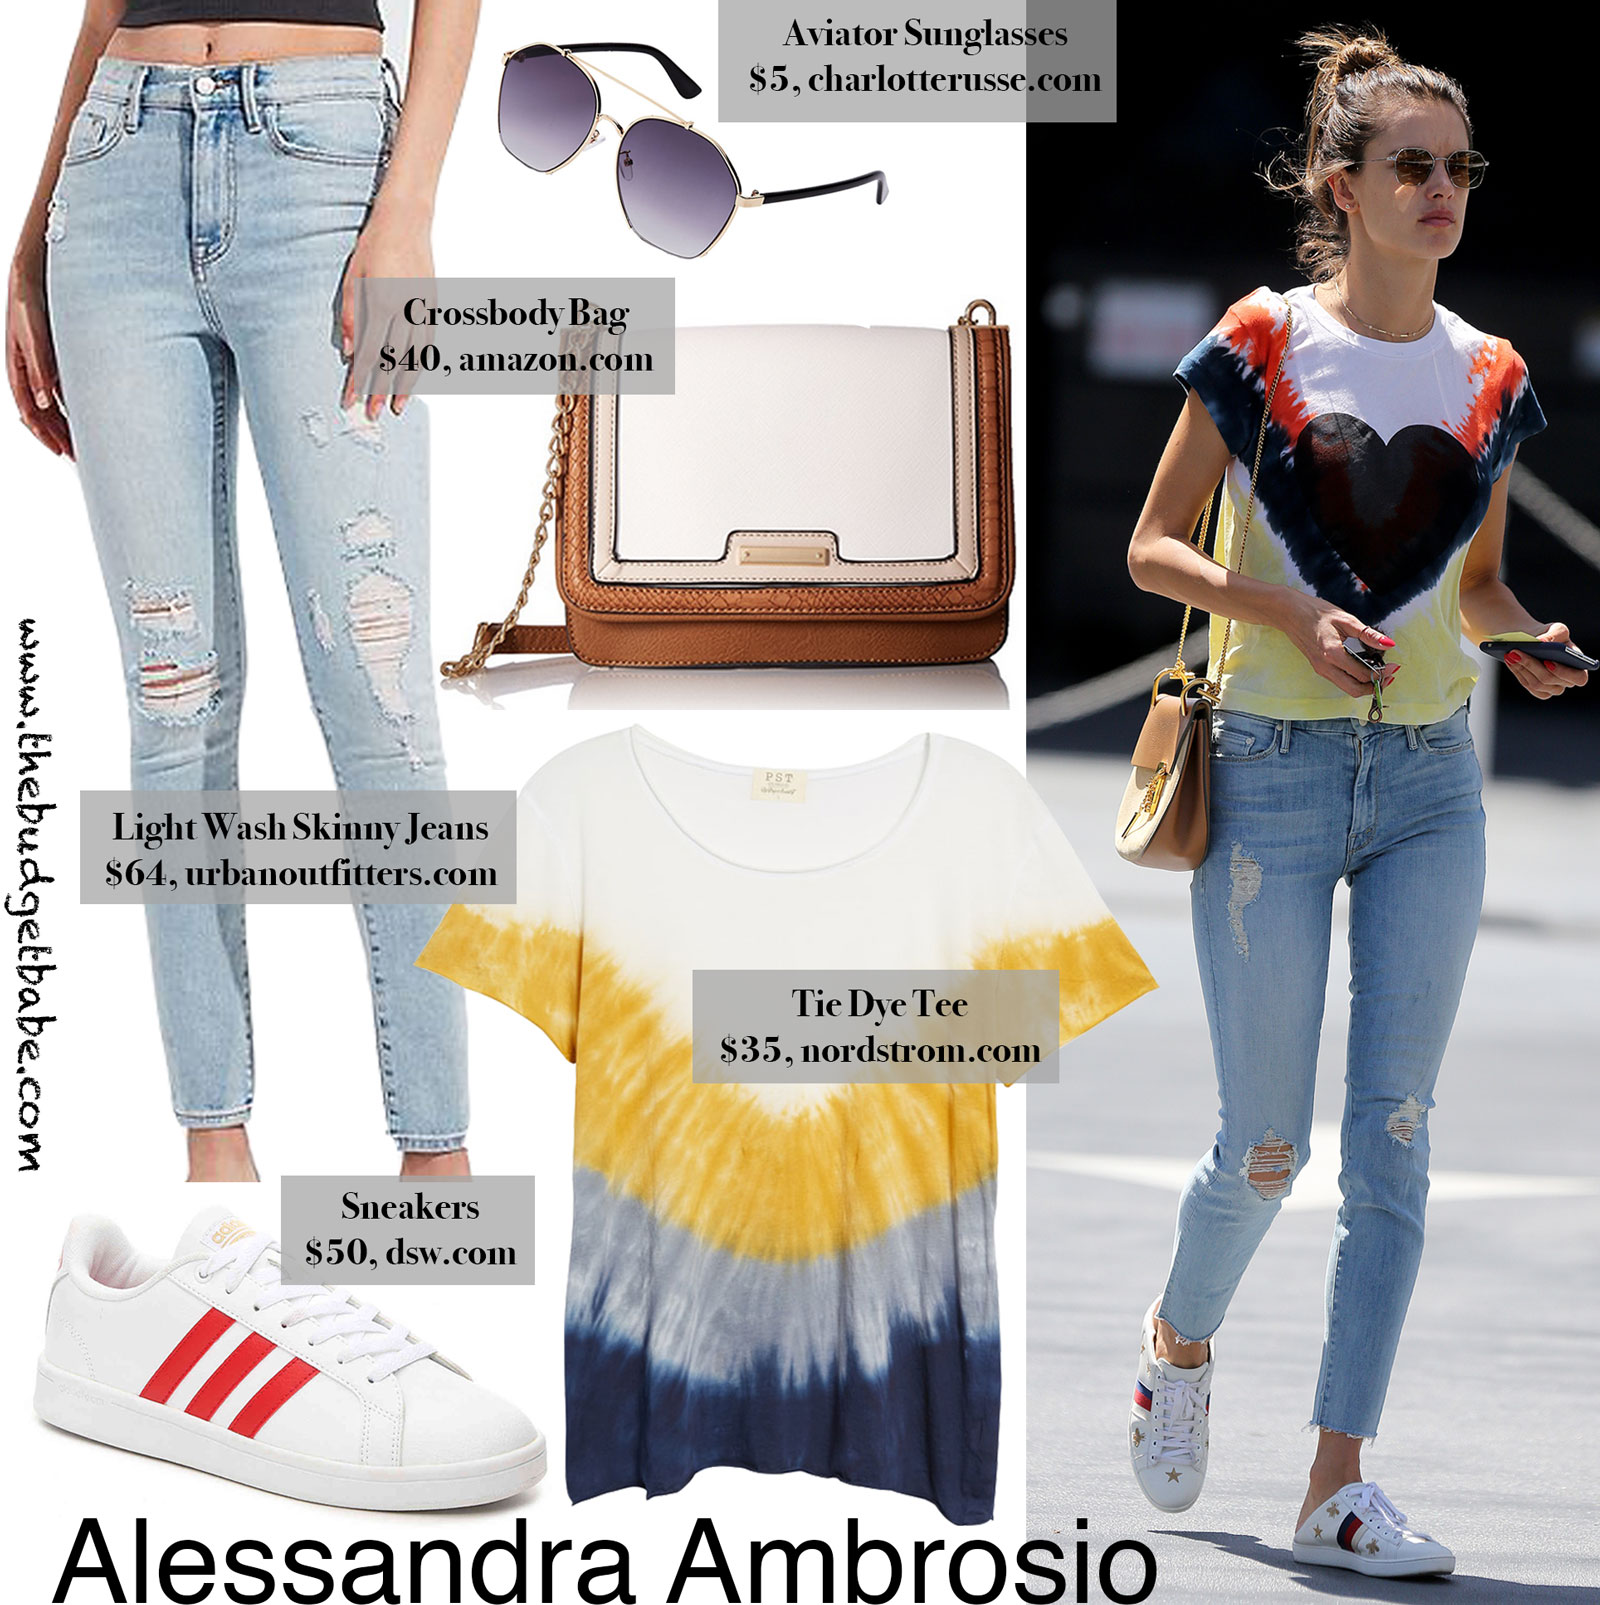 Alessandra Ambrosio Tie Dye Tee Look for Less